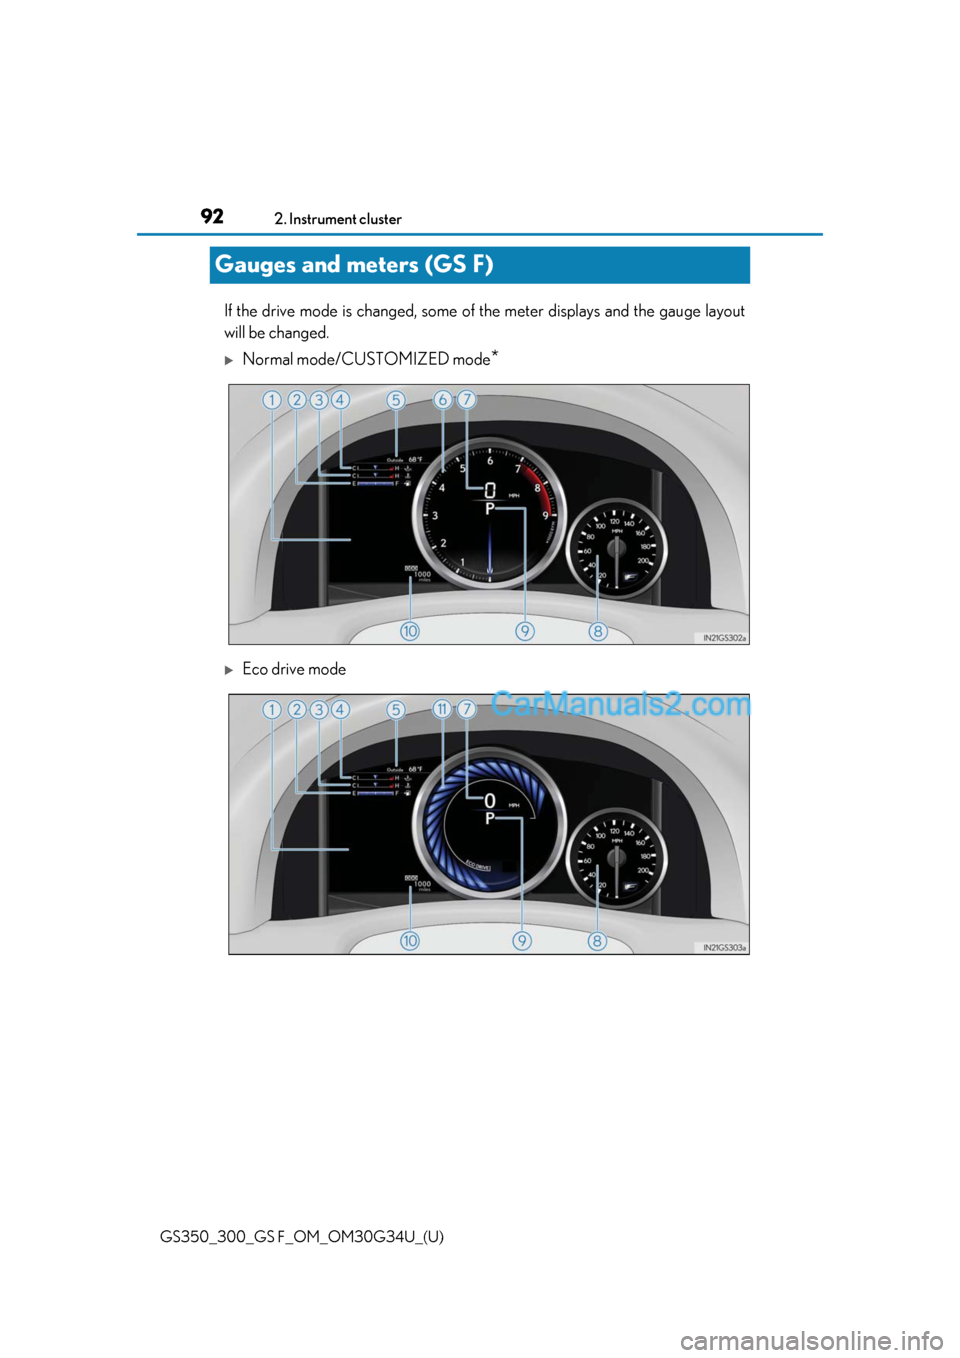 Lexus GS300 2018  s Owners Manual 92
GS350_300_GS F_OM_OM30G34U_(U)2. Instrument cluster
Gauges and meters (GS F)
If the drive mode is changed, some of
 the meter displays and the gauge layout
will be changed.
Normal mode/CUSTOMIZE